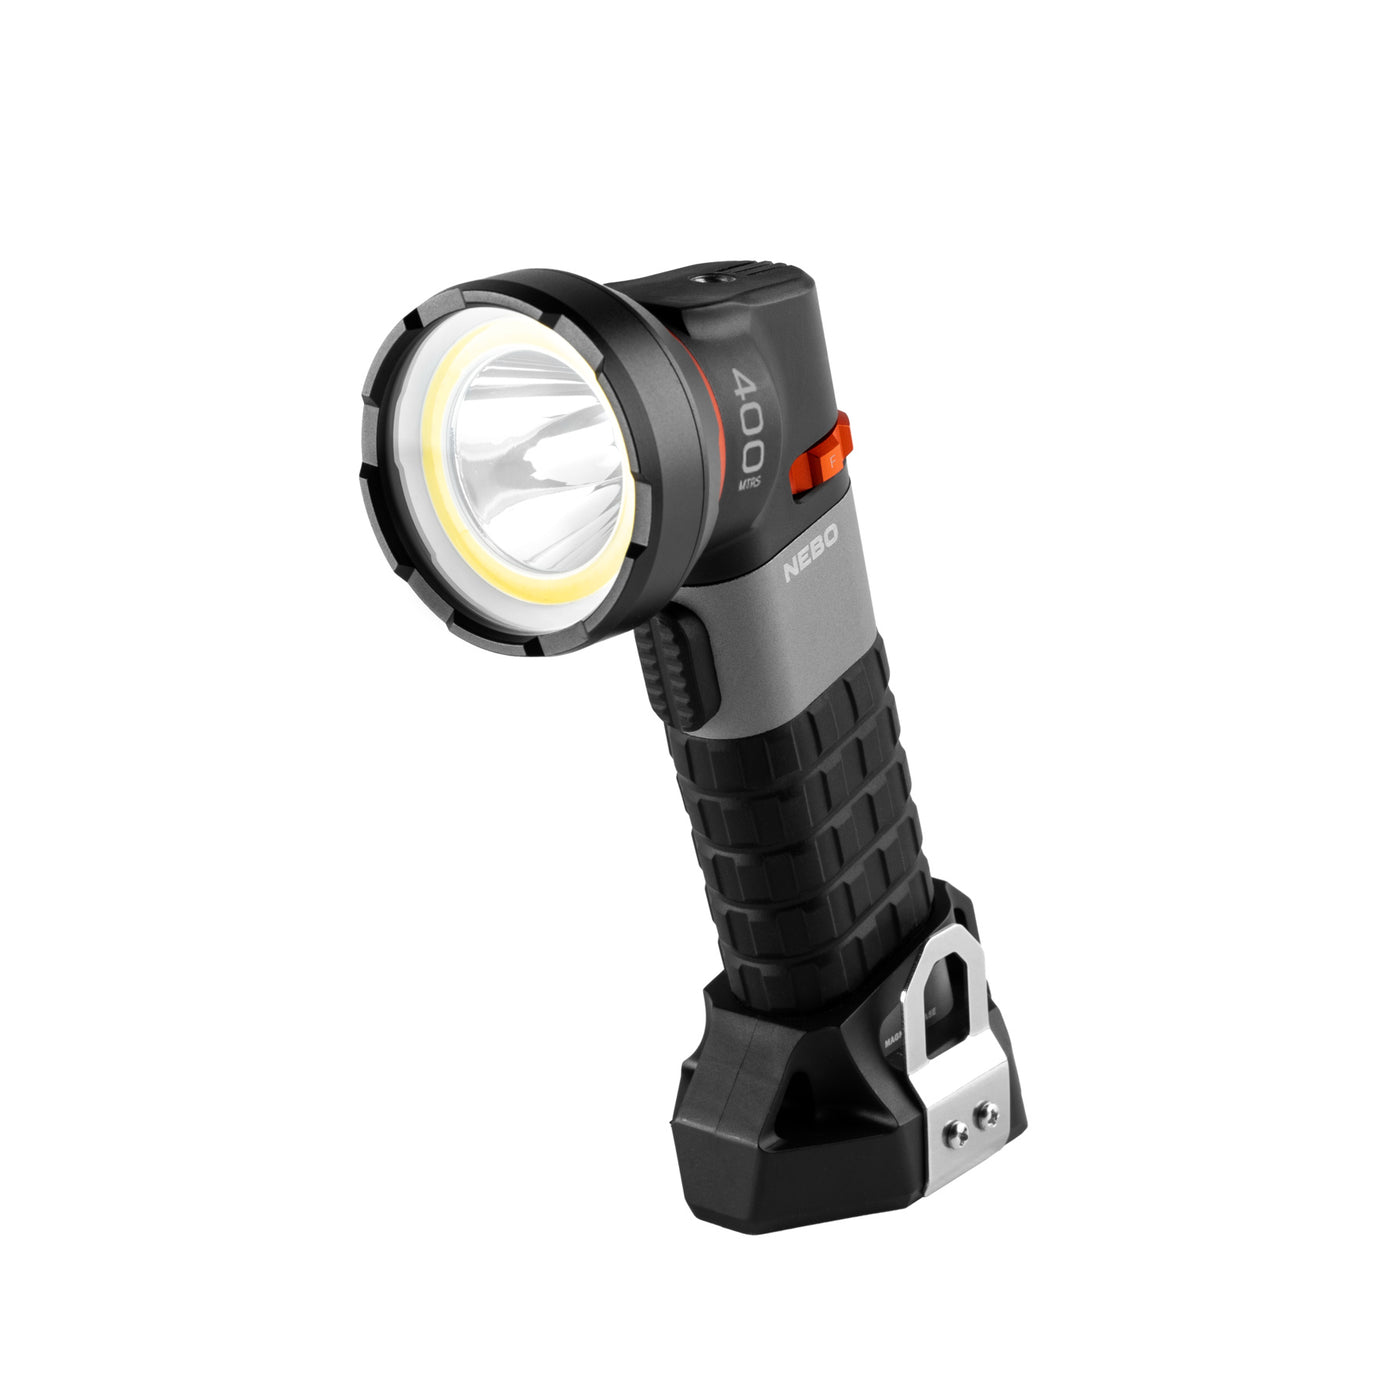 Luxtreme SL25R Spotlight | Rechargeable